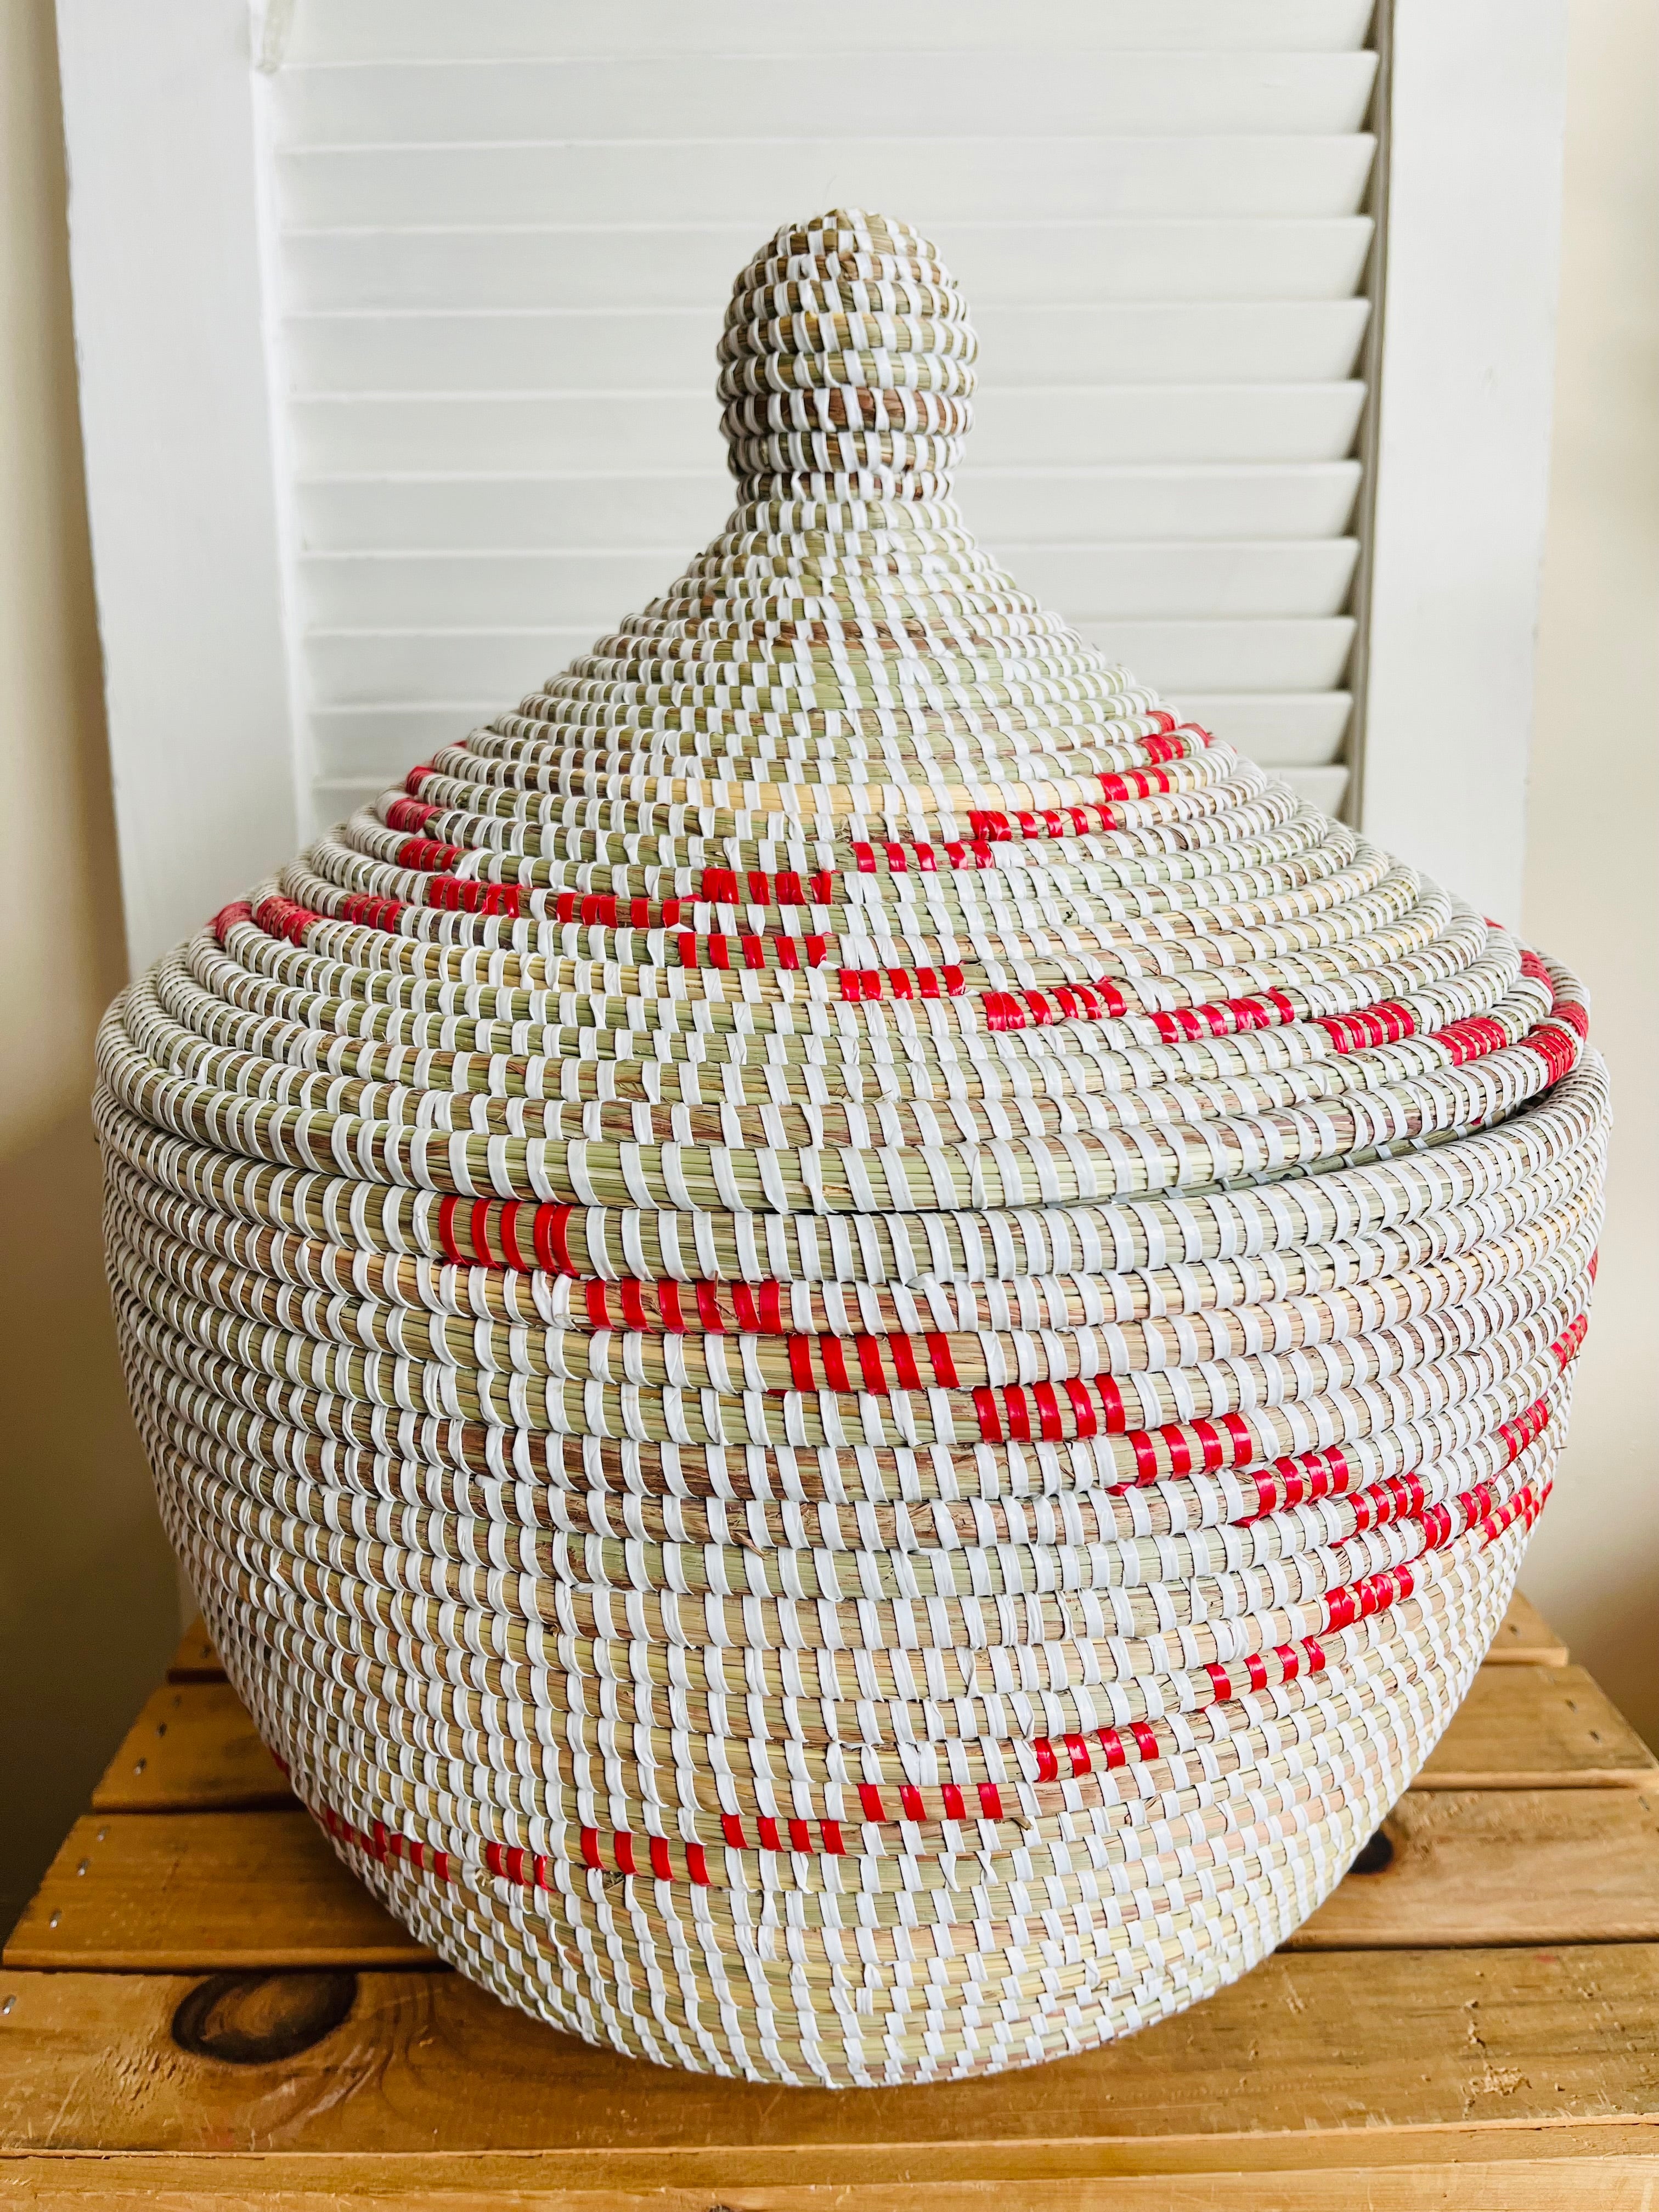 Handwoven Basket with Lid from Senegal